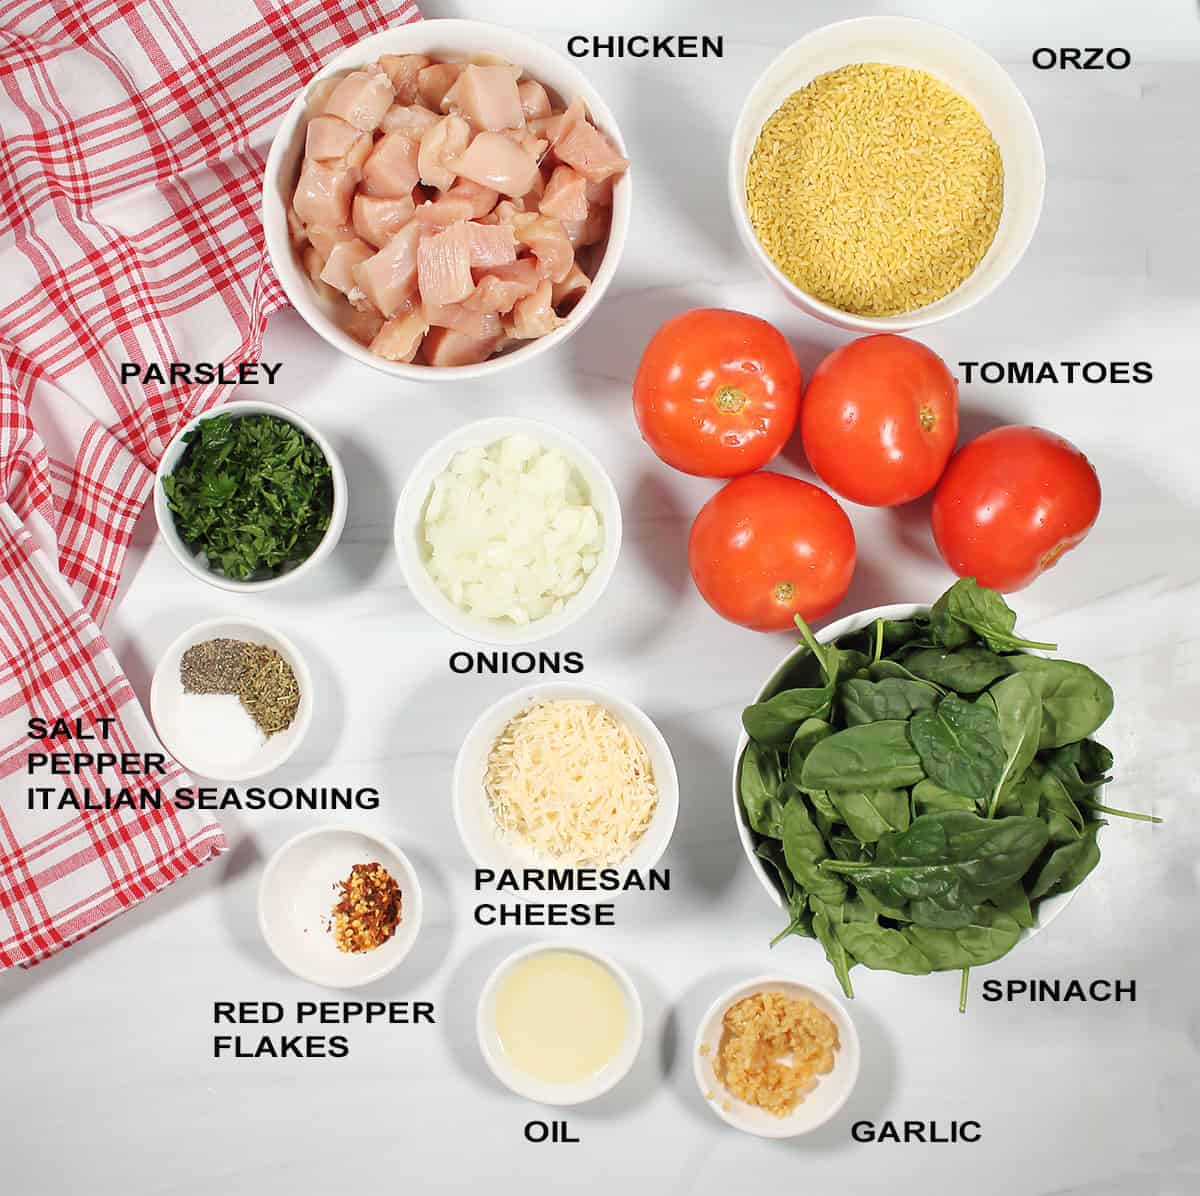 Ingredients for chicken orzo recipe.